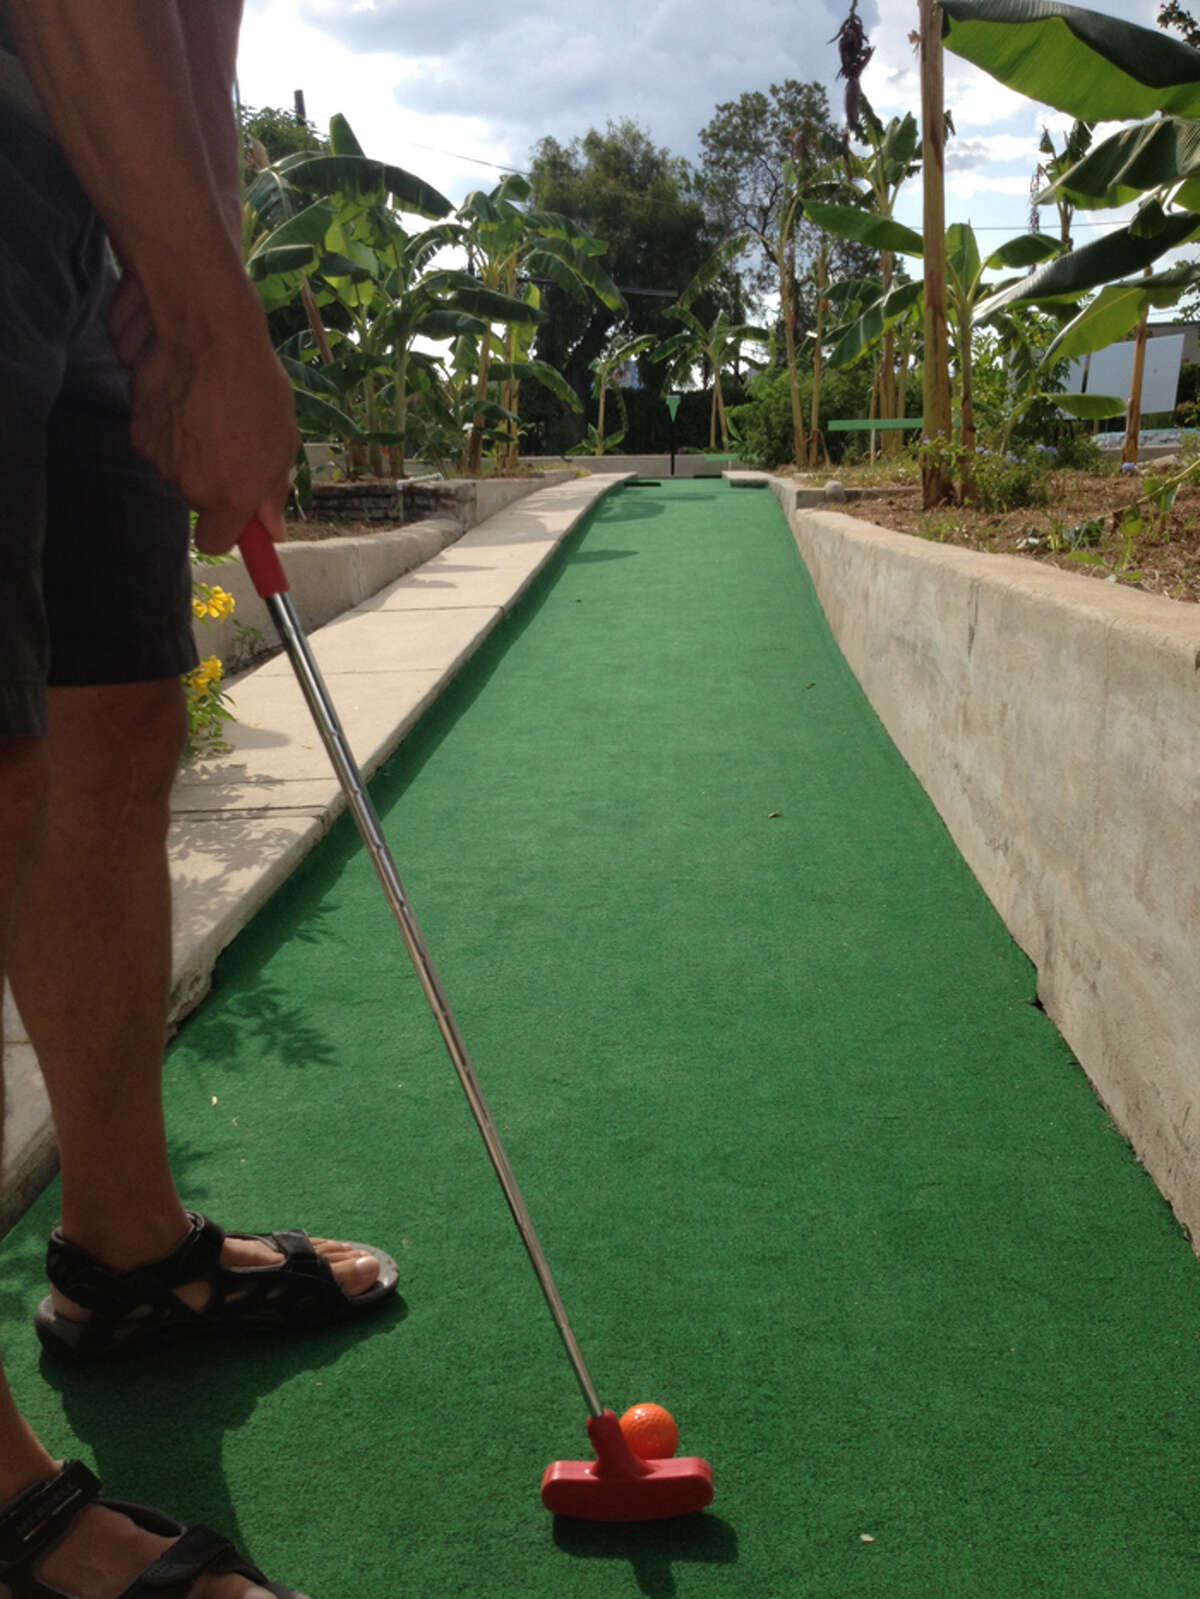 The new owners of Cool Crest have restored the iconic mini-golf course.